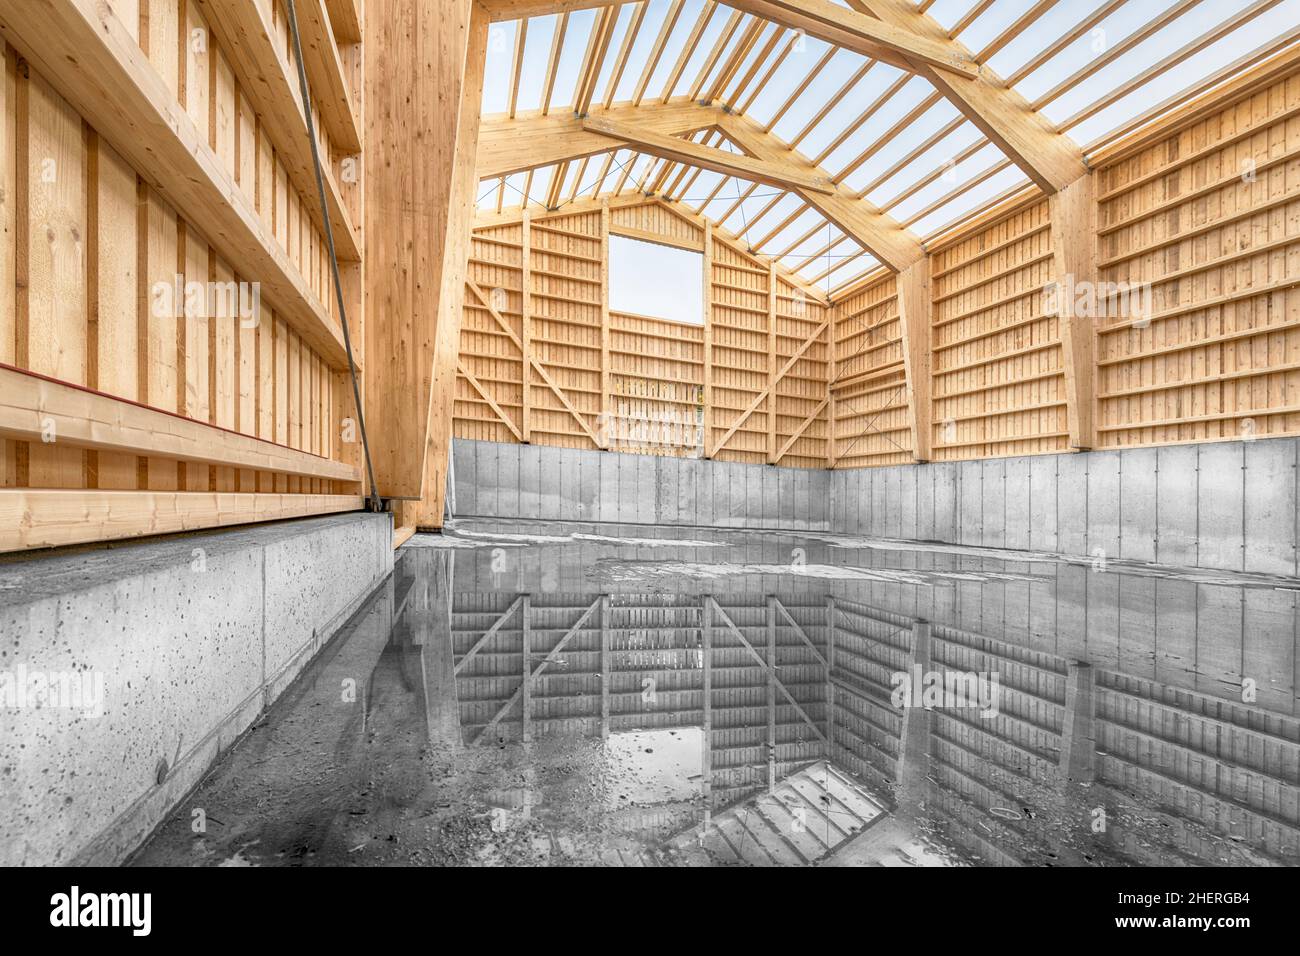 Large engineering hall in timber construction with a concrete base wall and reflection of the construction in the water Stock Photo